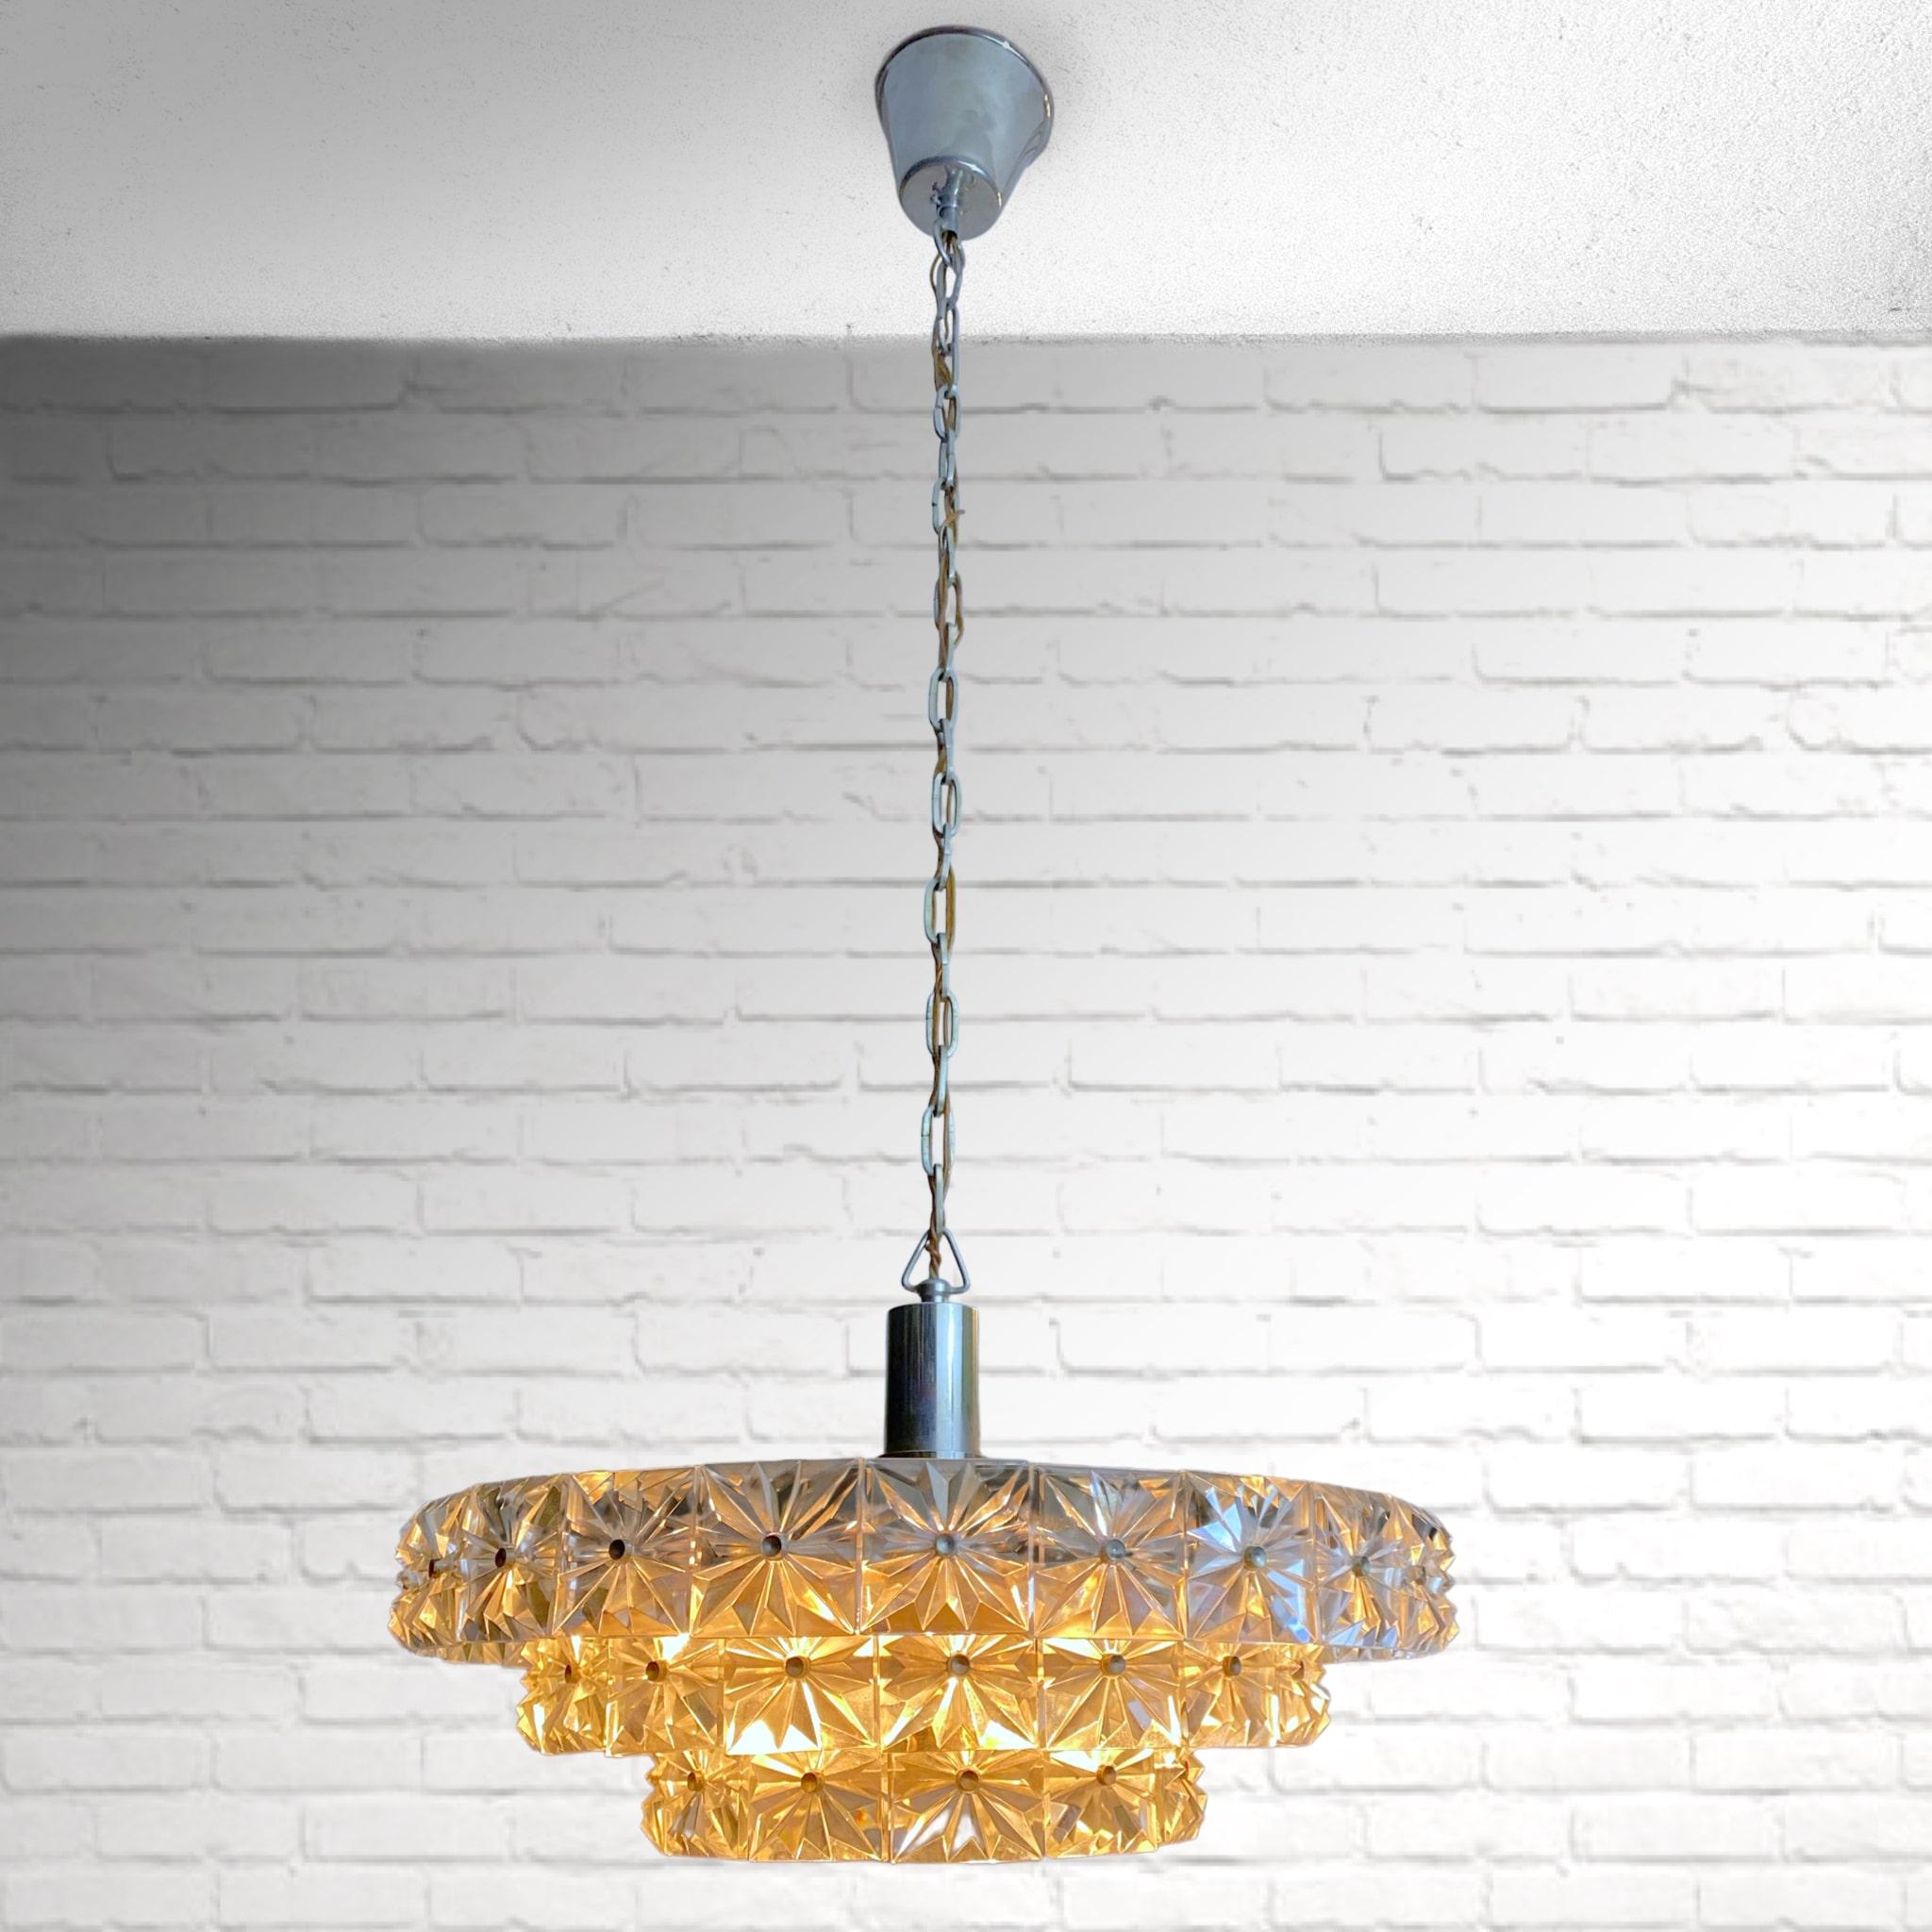 Mid-century chandelier produced in the 1960s by the Swedish manufacturer Eriksmåla. Constructed with 54 crystal elements mounted on a chrome frame, it features six metal lamp holders and a canopy made from chrome metal. The height can easily be